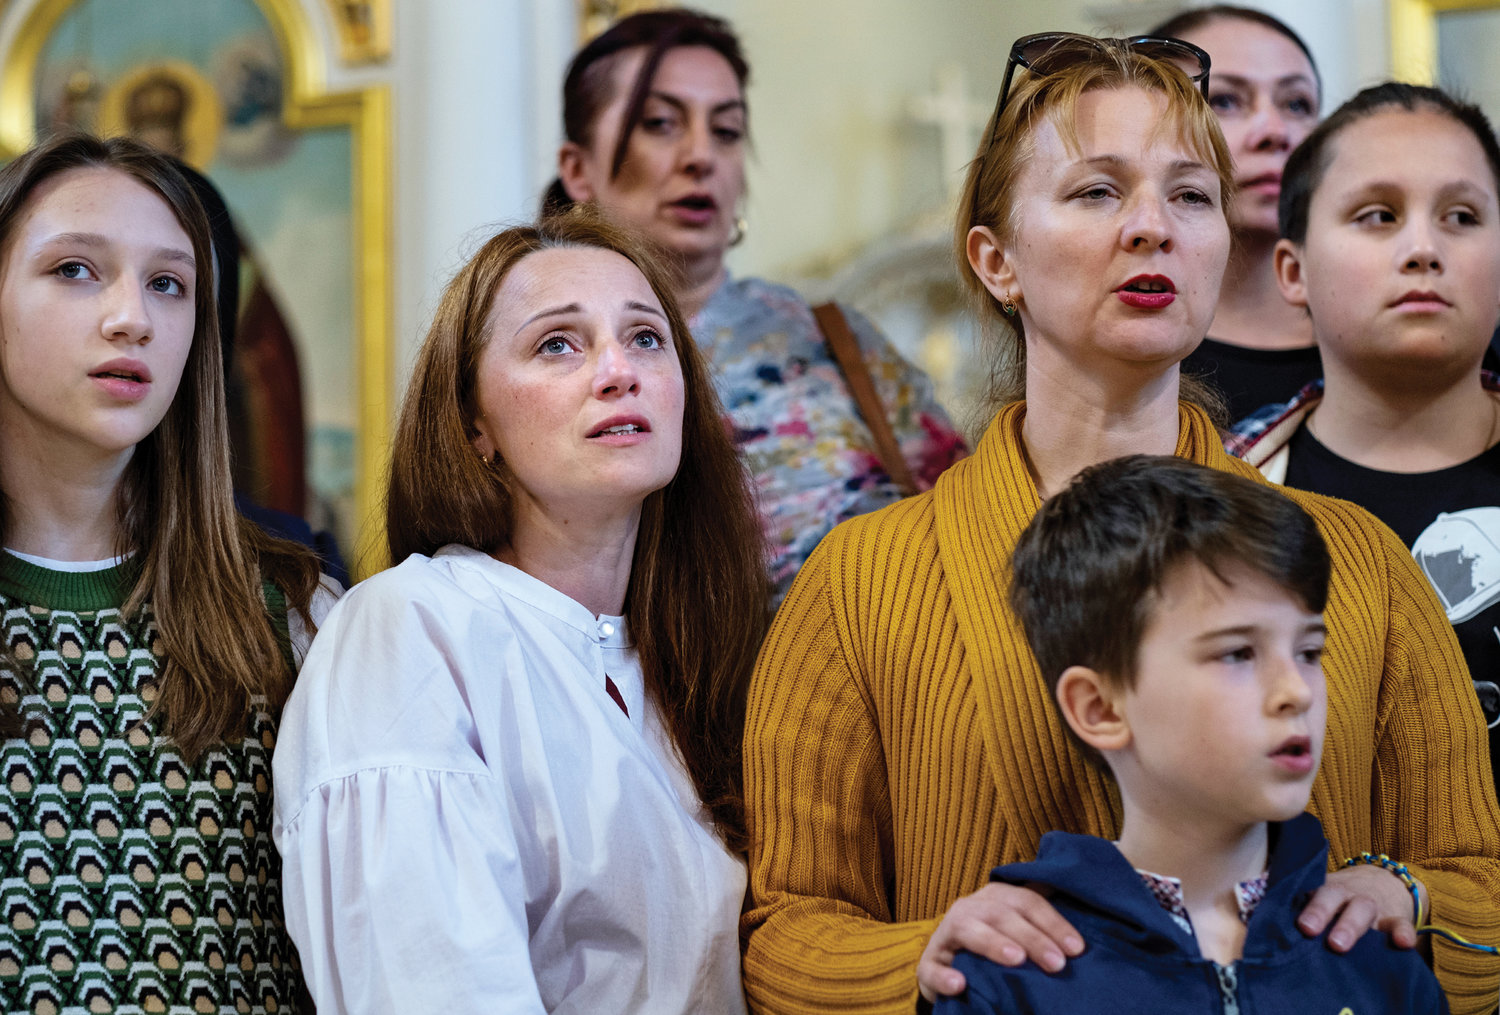 Ukrainian refugees in Slovakia sing during a special service at the Eparchy of Košice Greek Catholic Church April 30.